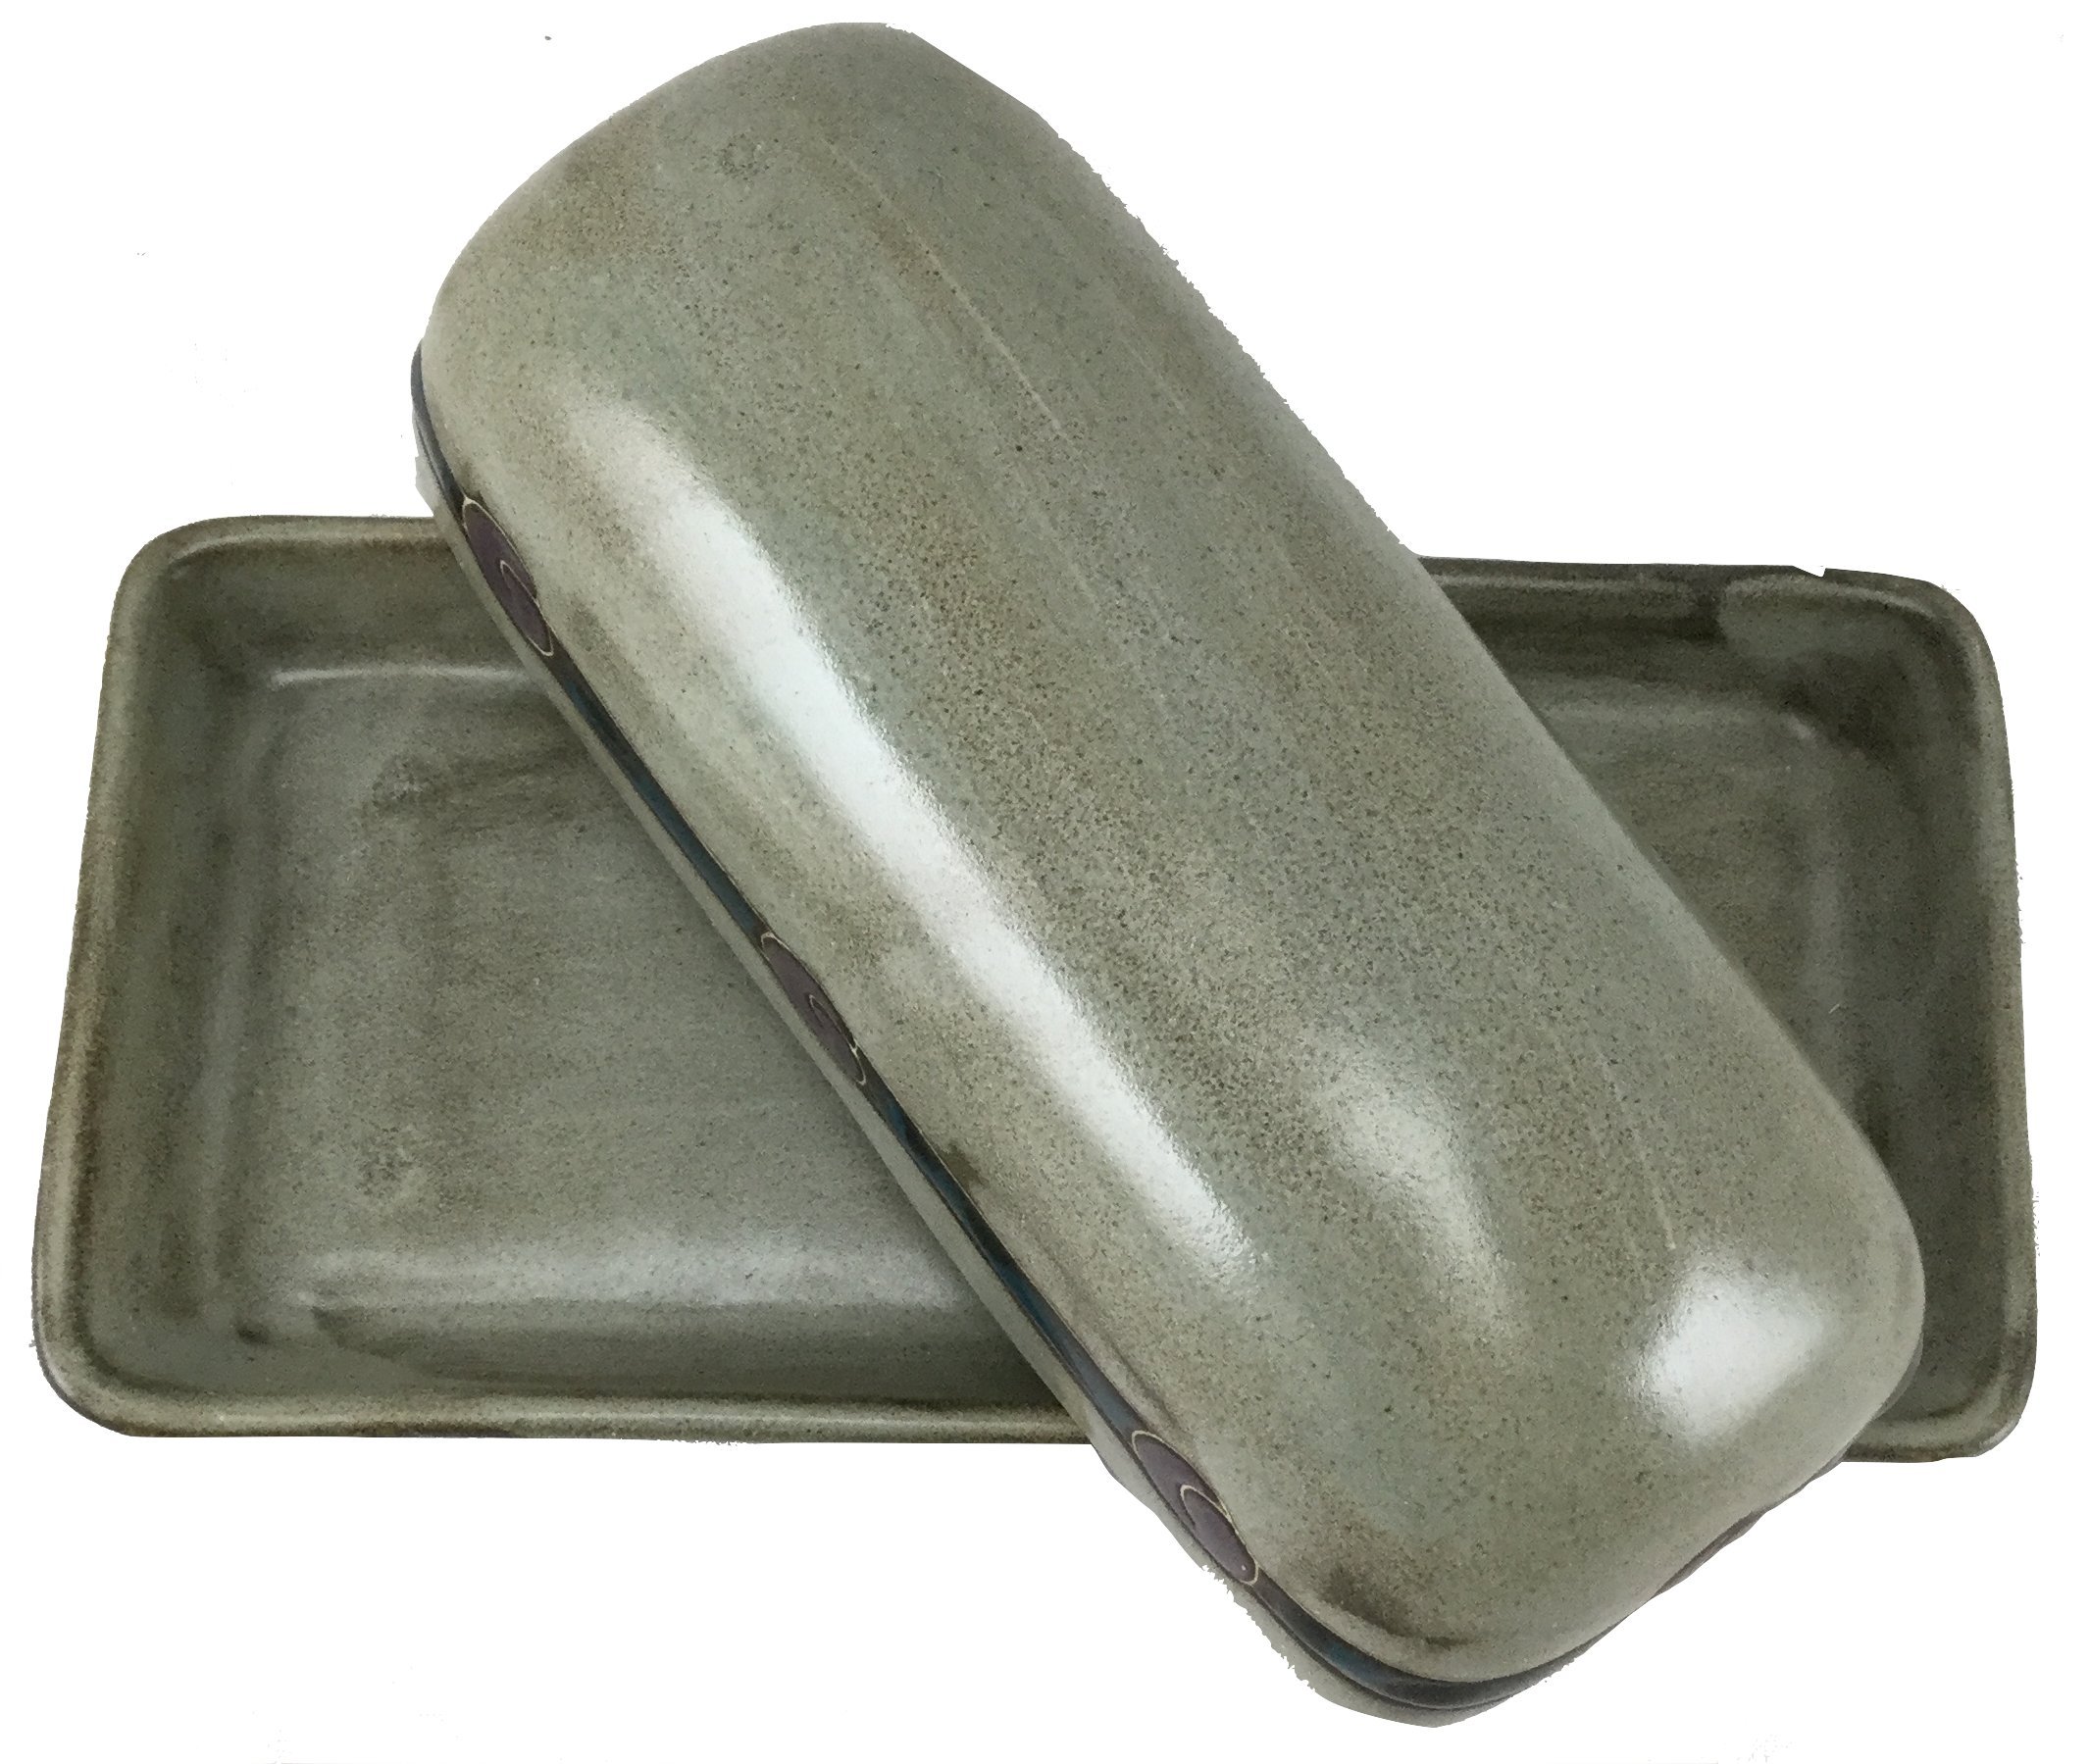 MARA STONEWARE COLLECTION - Collectible Covered Butter Serving Dish - Mexican Pottery - Antique Green